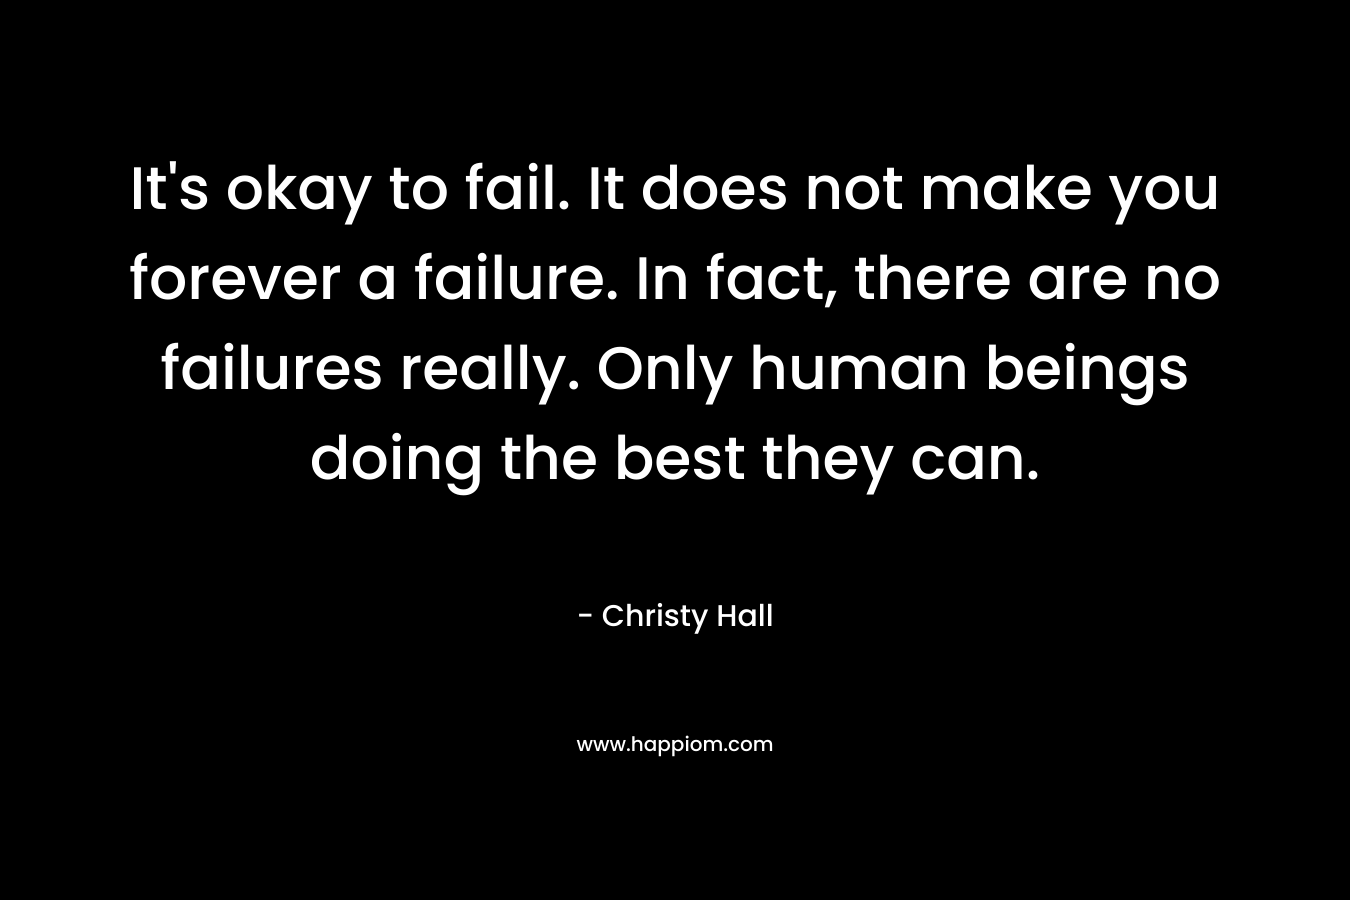 It's okay to fail. It does not make you forever a failure. In fact, there are no failures really. Only human beings doing the best they can.